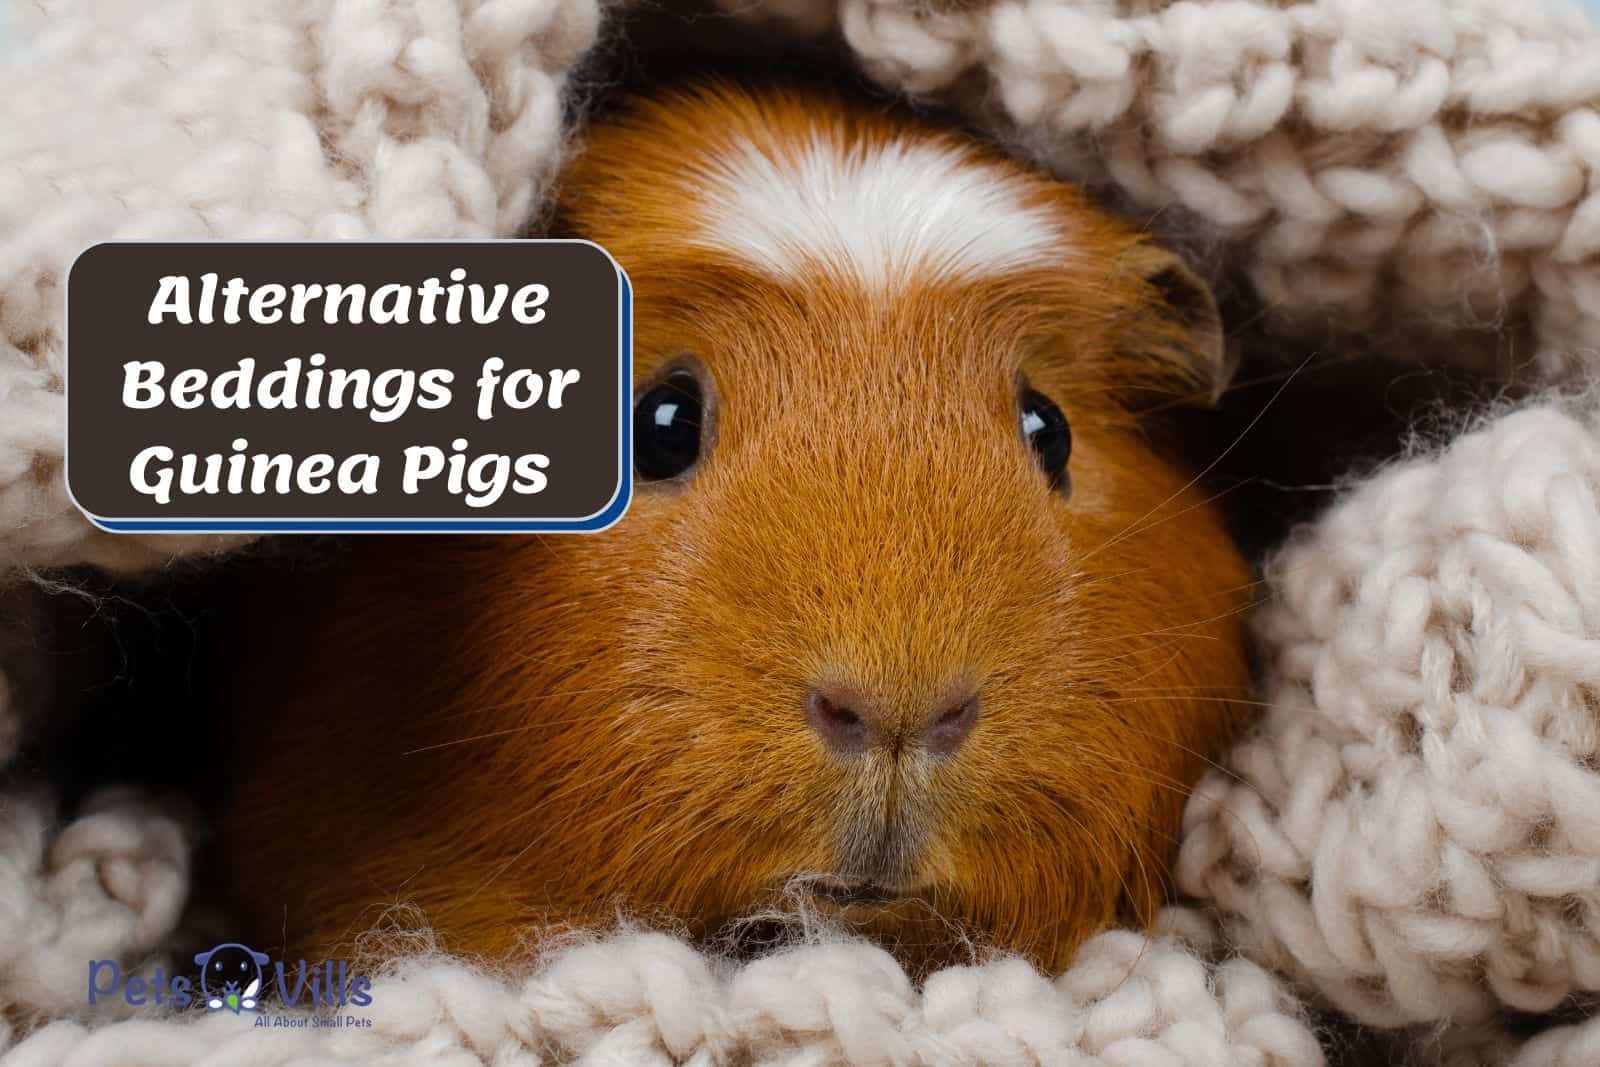 A guinea pig hiding under a knitted blanket but what are the best Alternative Beddings for Guinea Pigs?